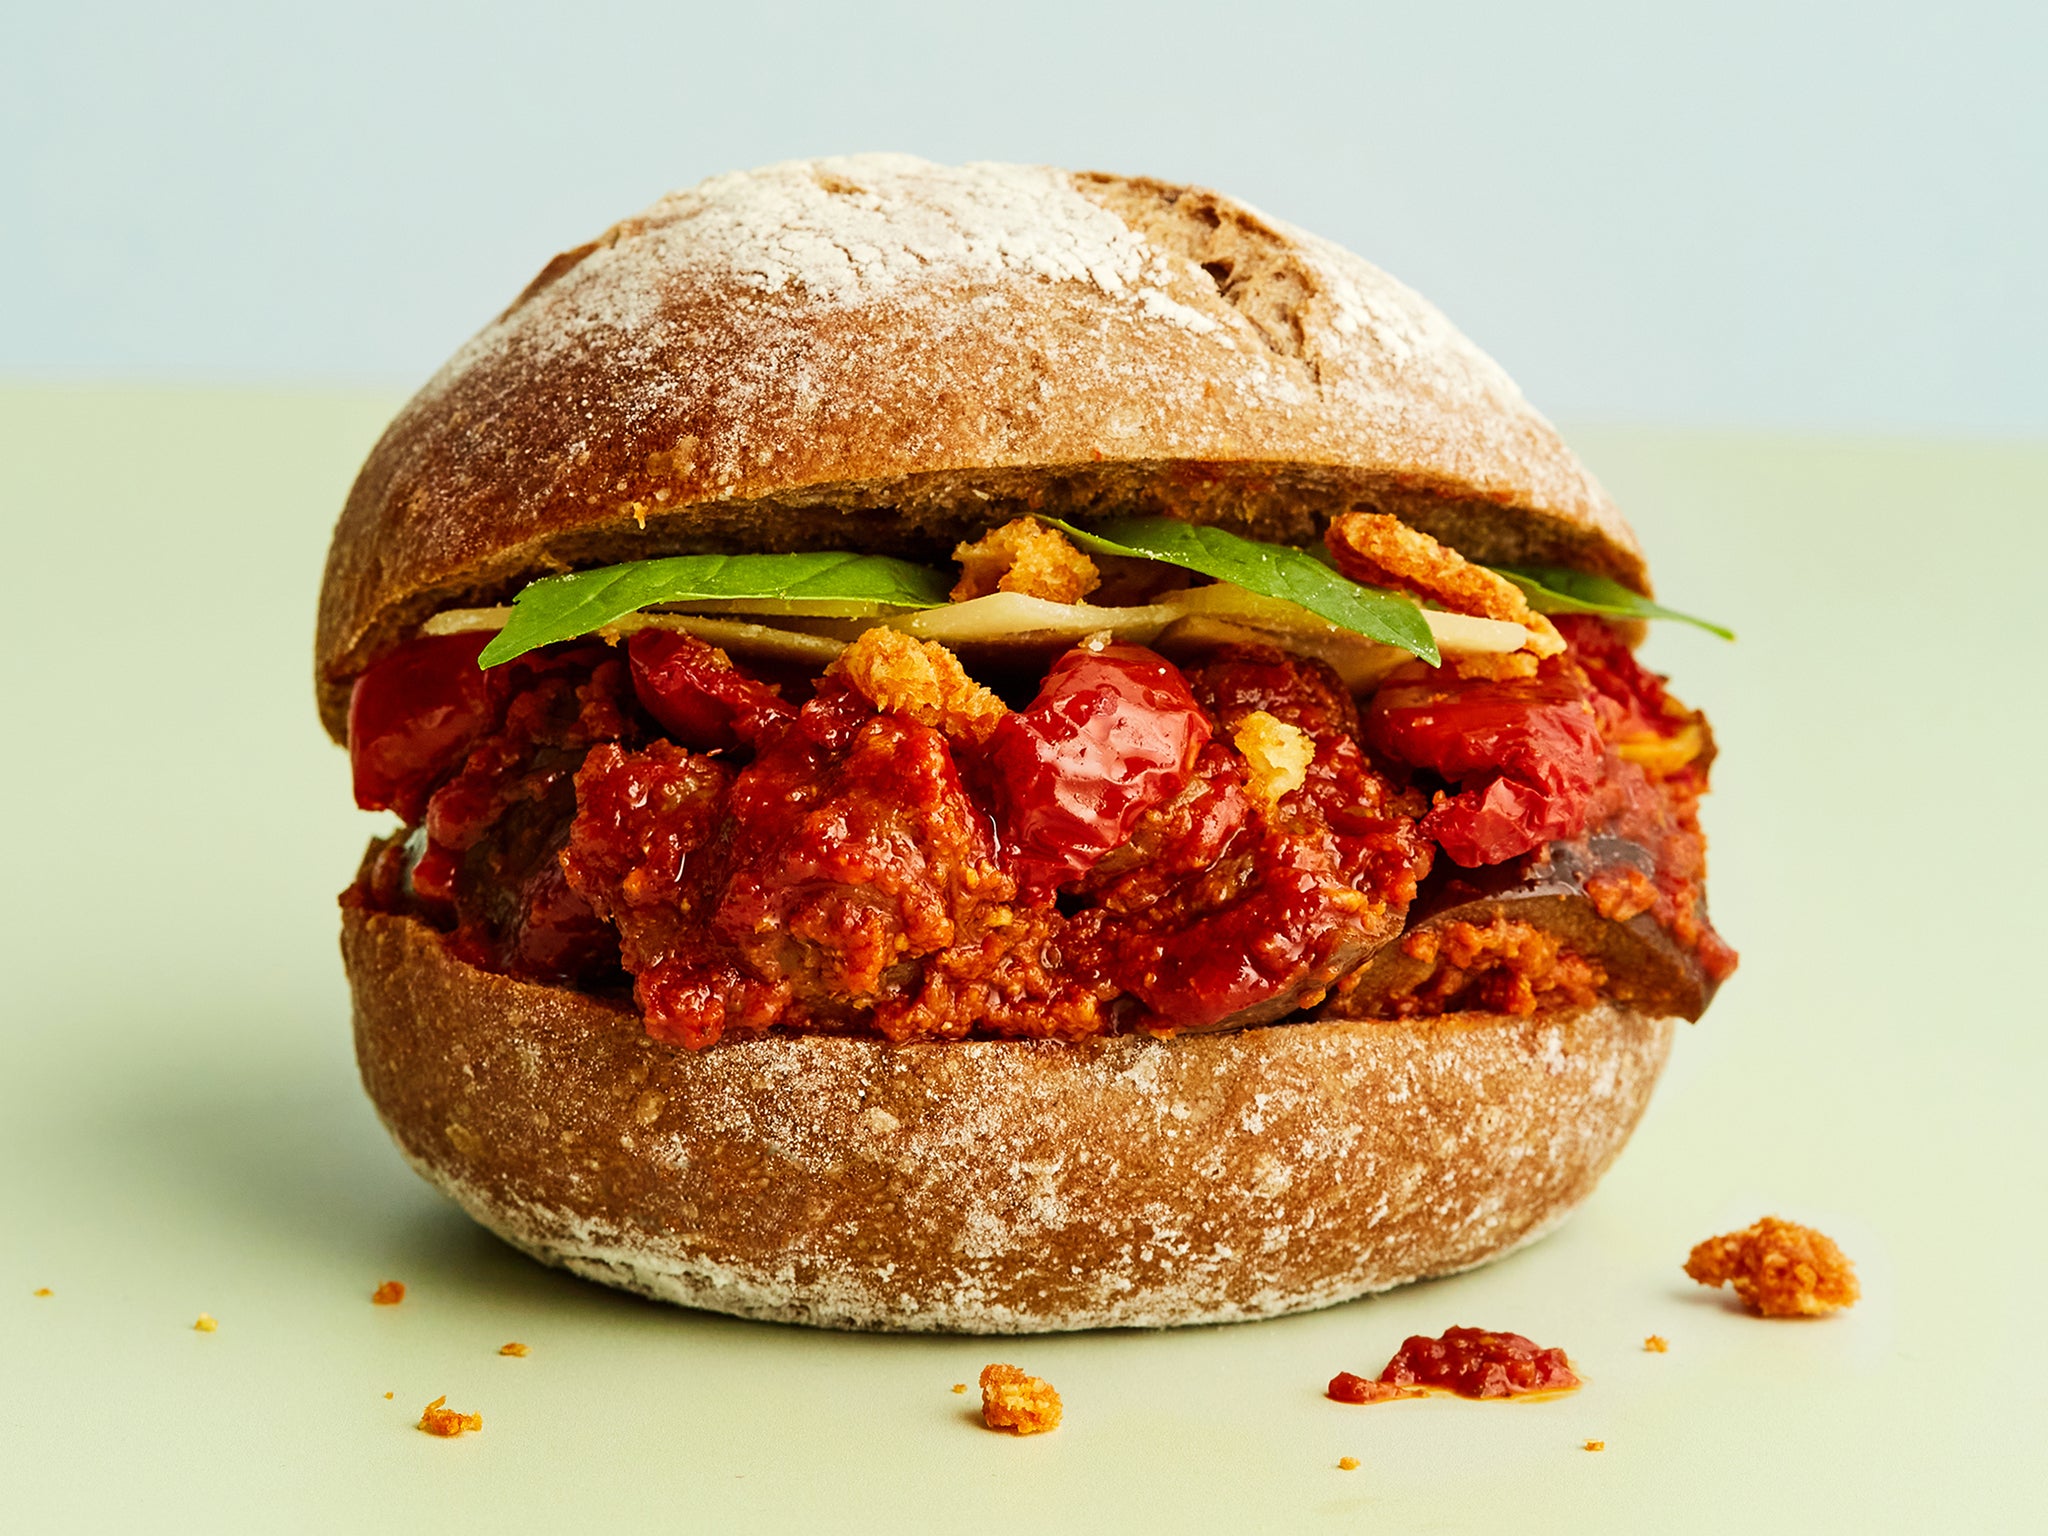 Pret’s aubergine parmigiana rye roll was a new addition to the menu in spring